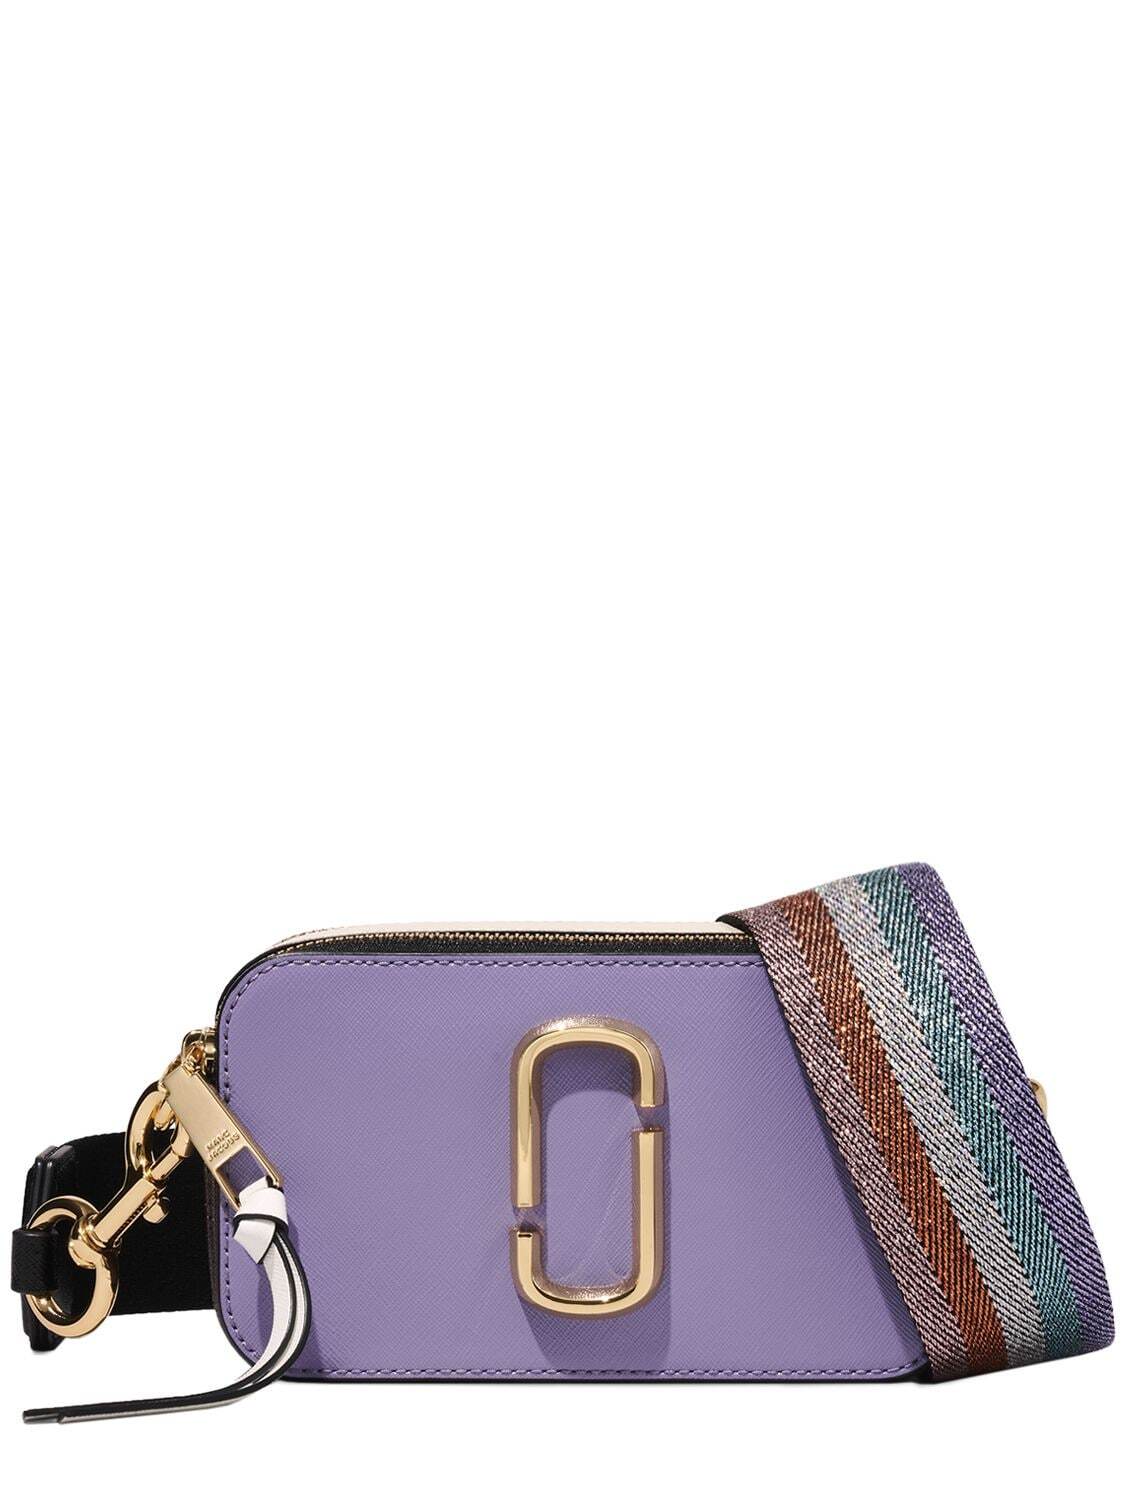 MARC JACOBS (THE) The Snapshot Leather Shoulder Bag in multi